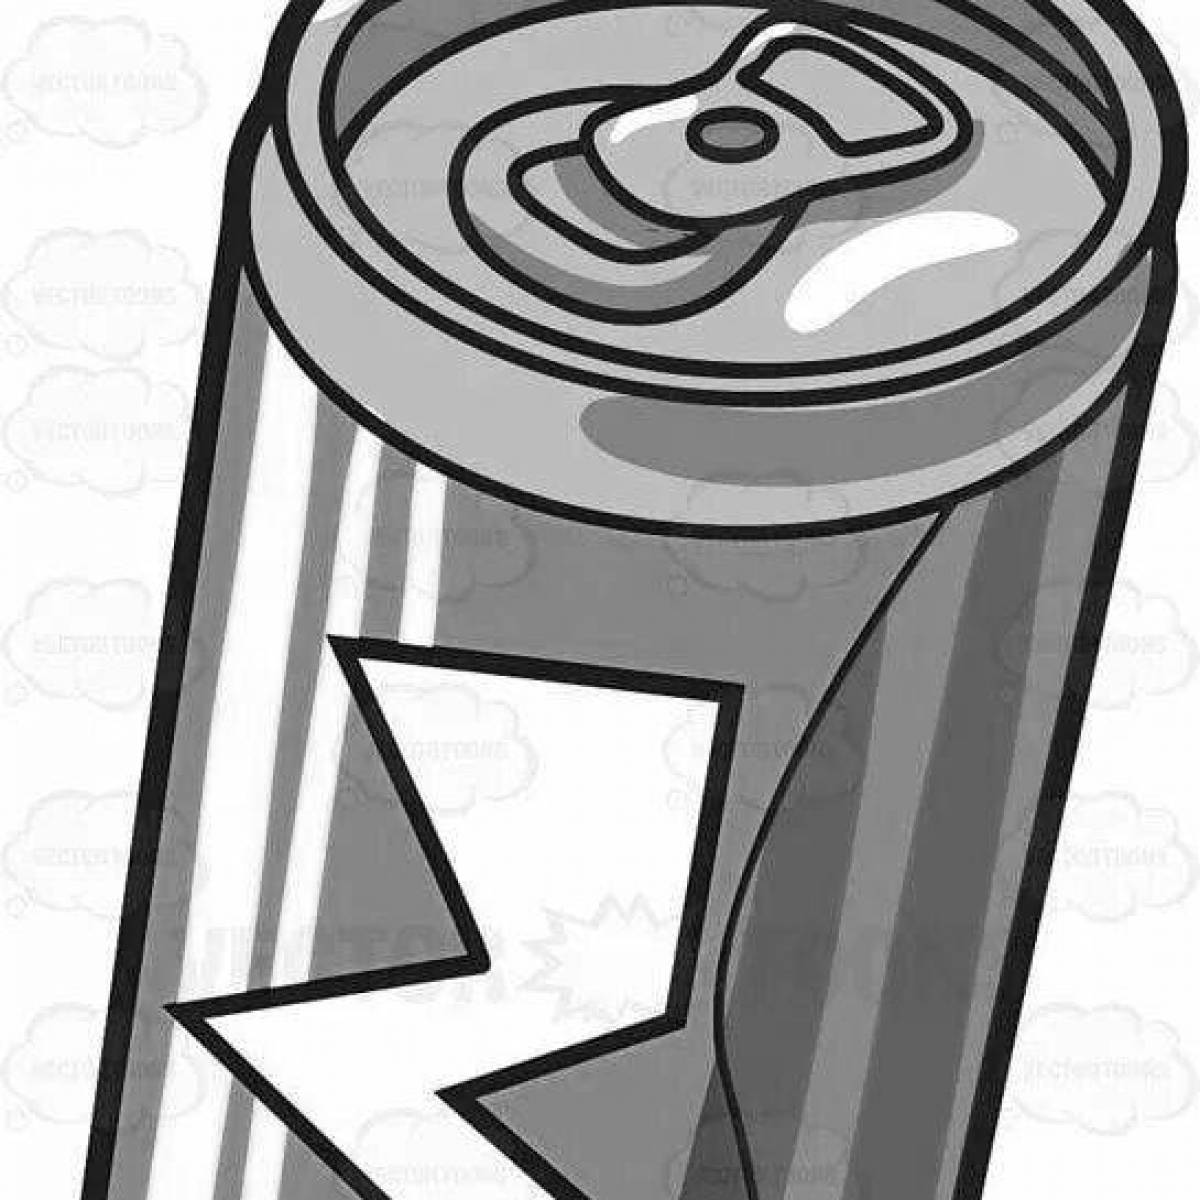 Coloring page charming energy drink